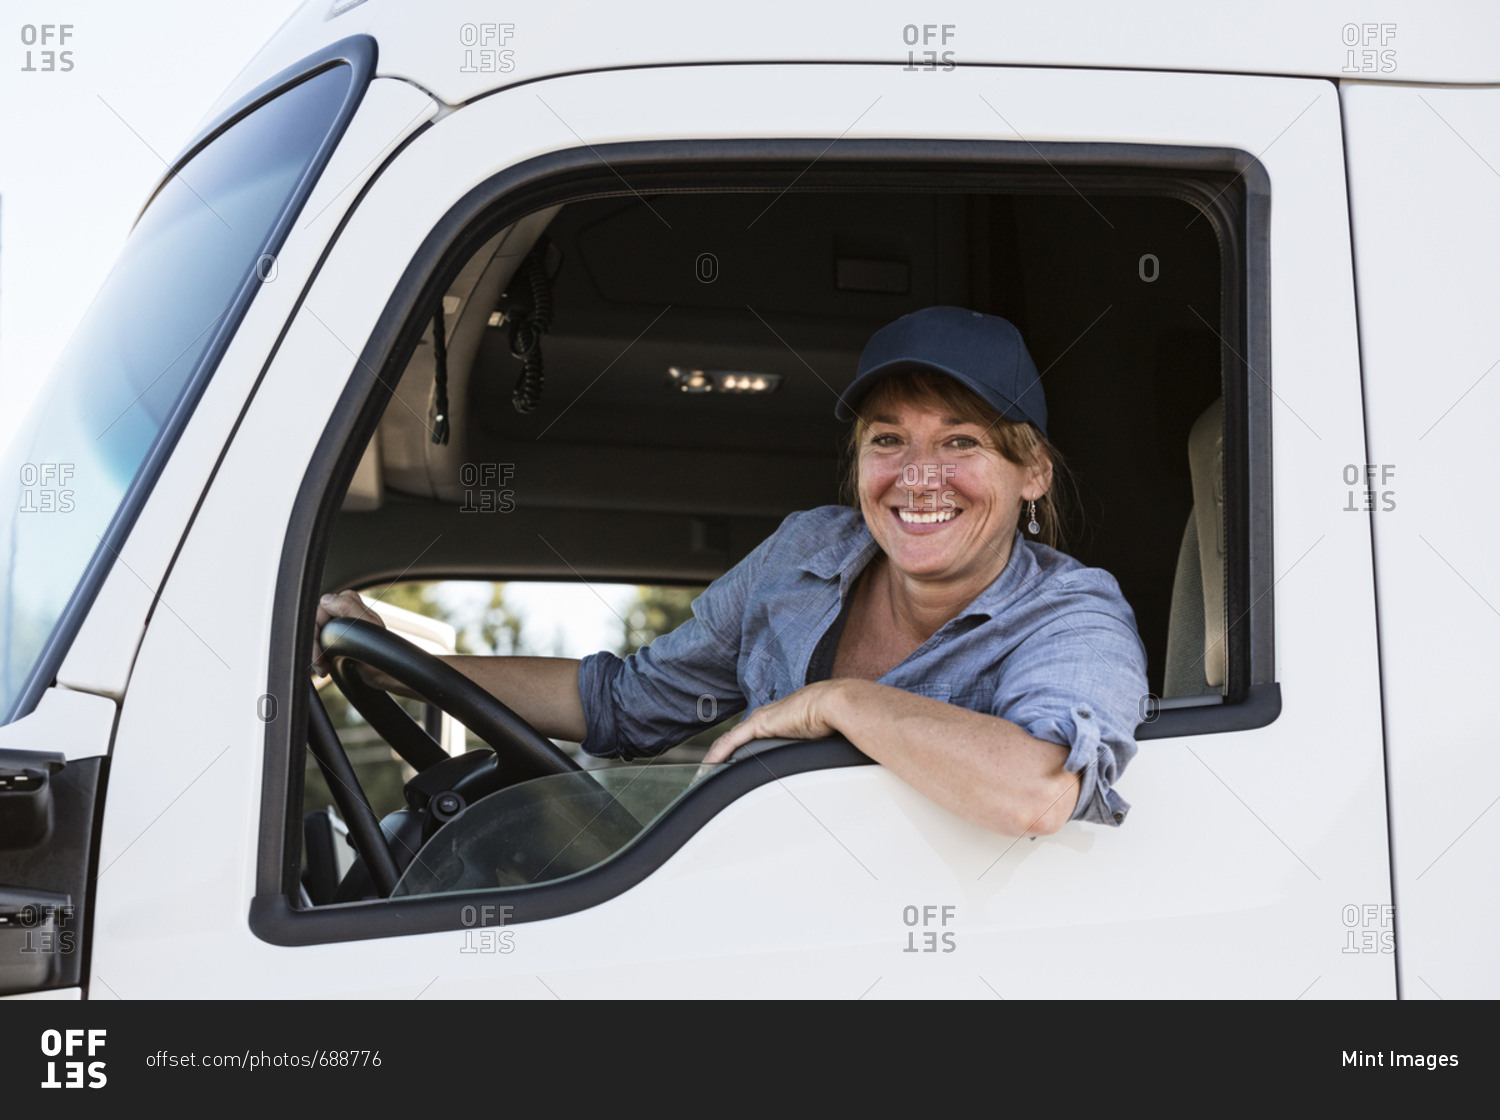 Caucasian woman truck driver in the cab of her commercial truck at a truck stop